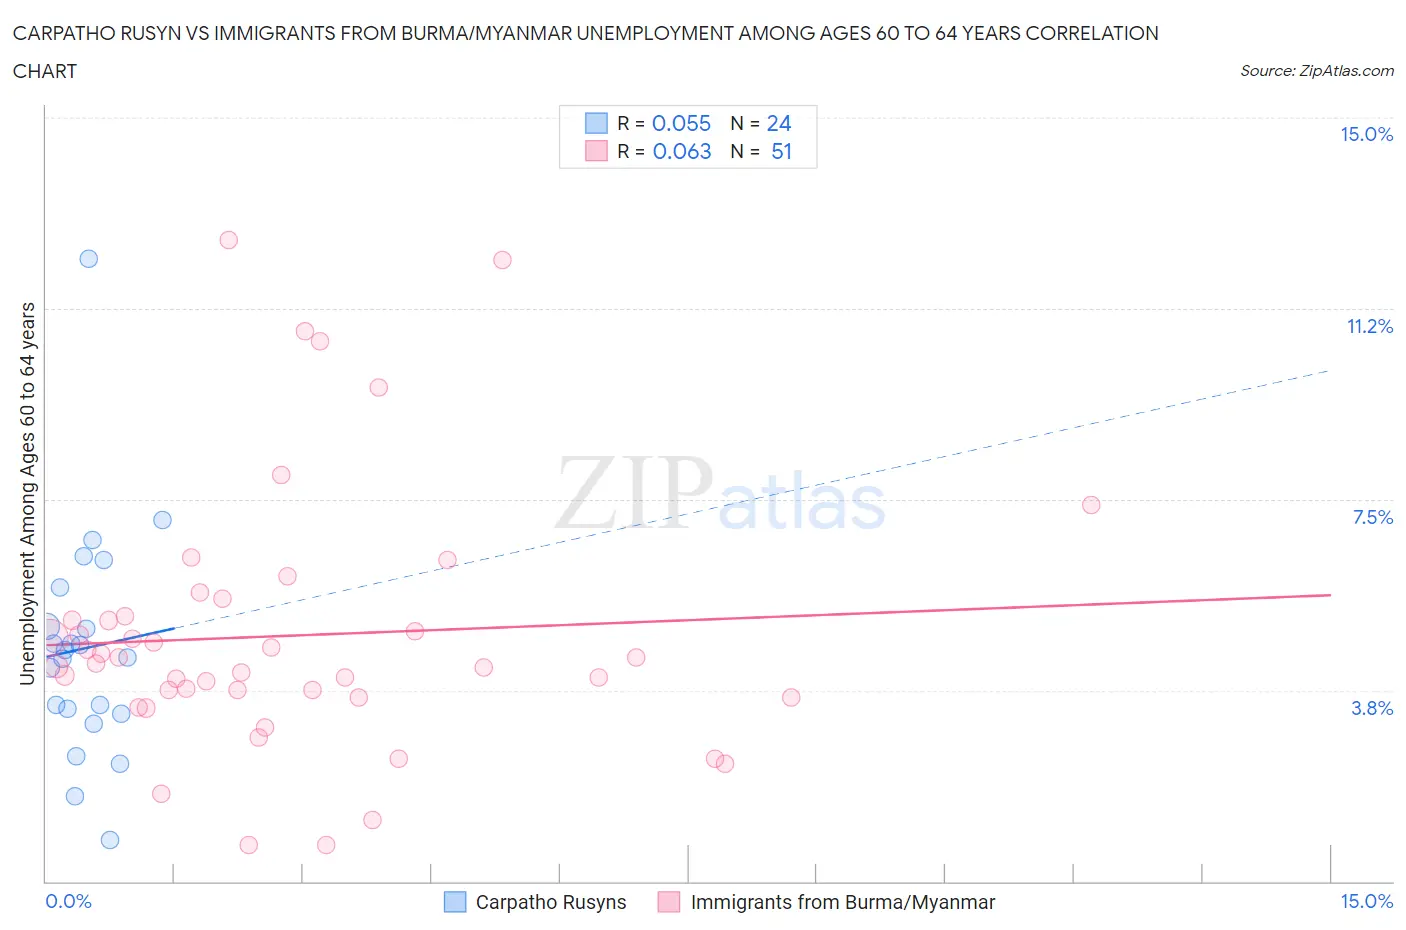 Carpatho Rusyn vs Immigrants from Burma/Myanmar Unemployment Among Ages 60 to 64 years